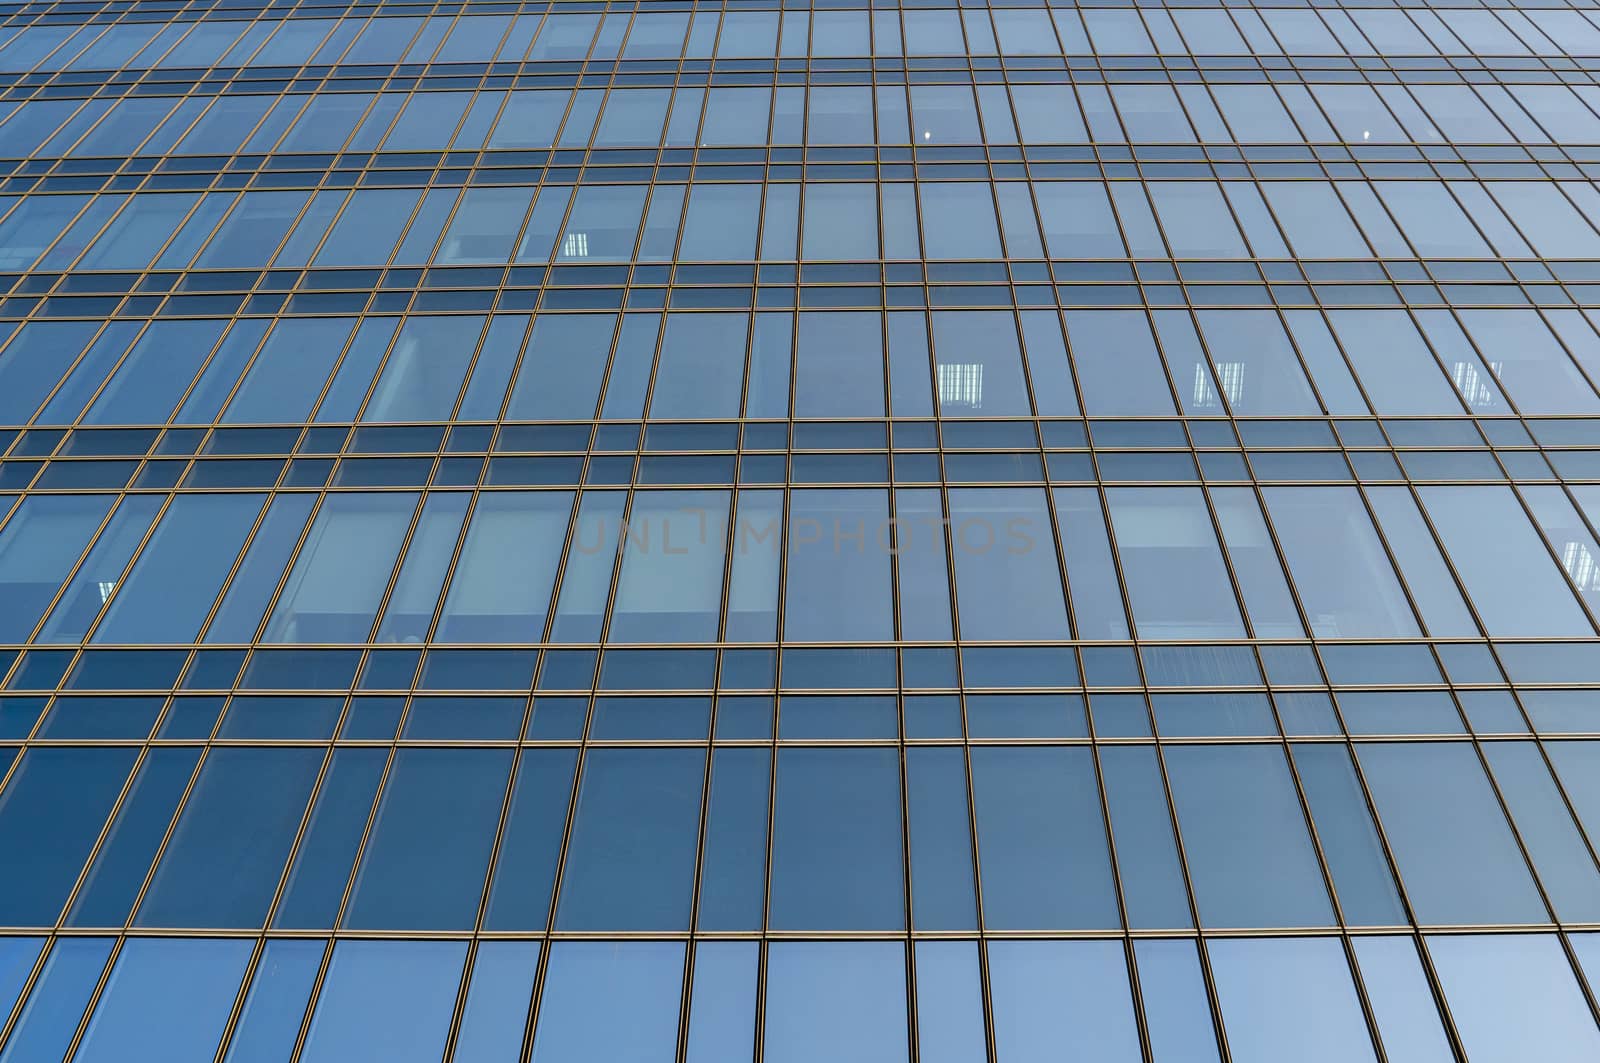 Reflection of the sky in the windows of a building. Perspective and underdite angle view to modern glass building skyscrapers over blue sky. Windows of Bussiness office or corporate building